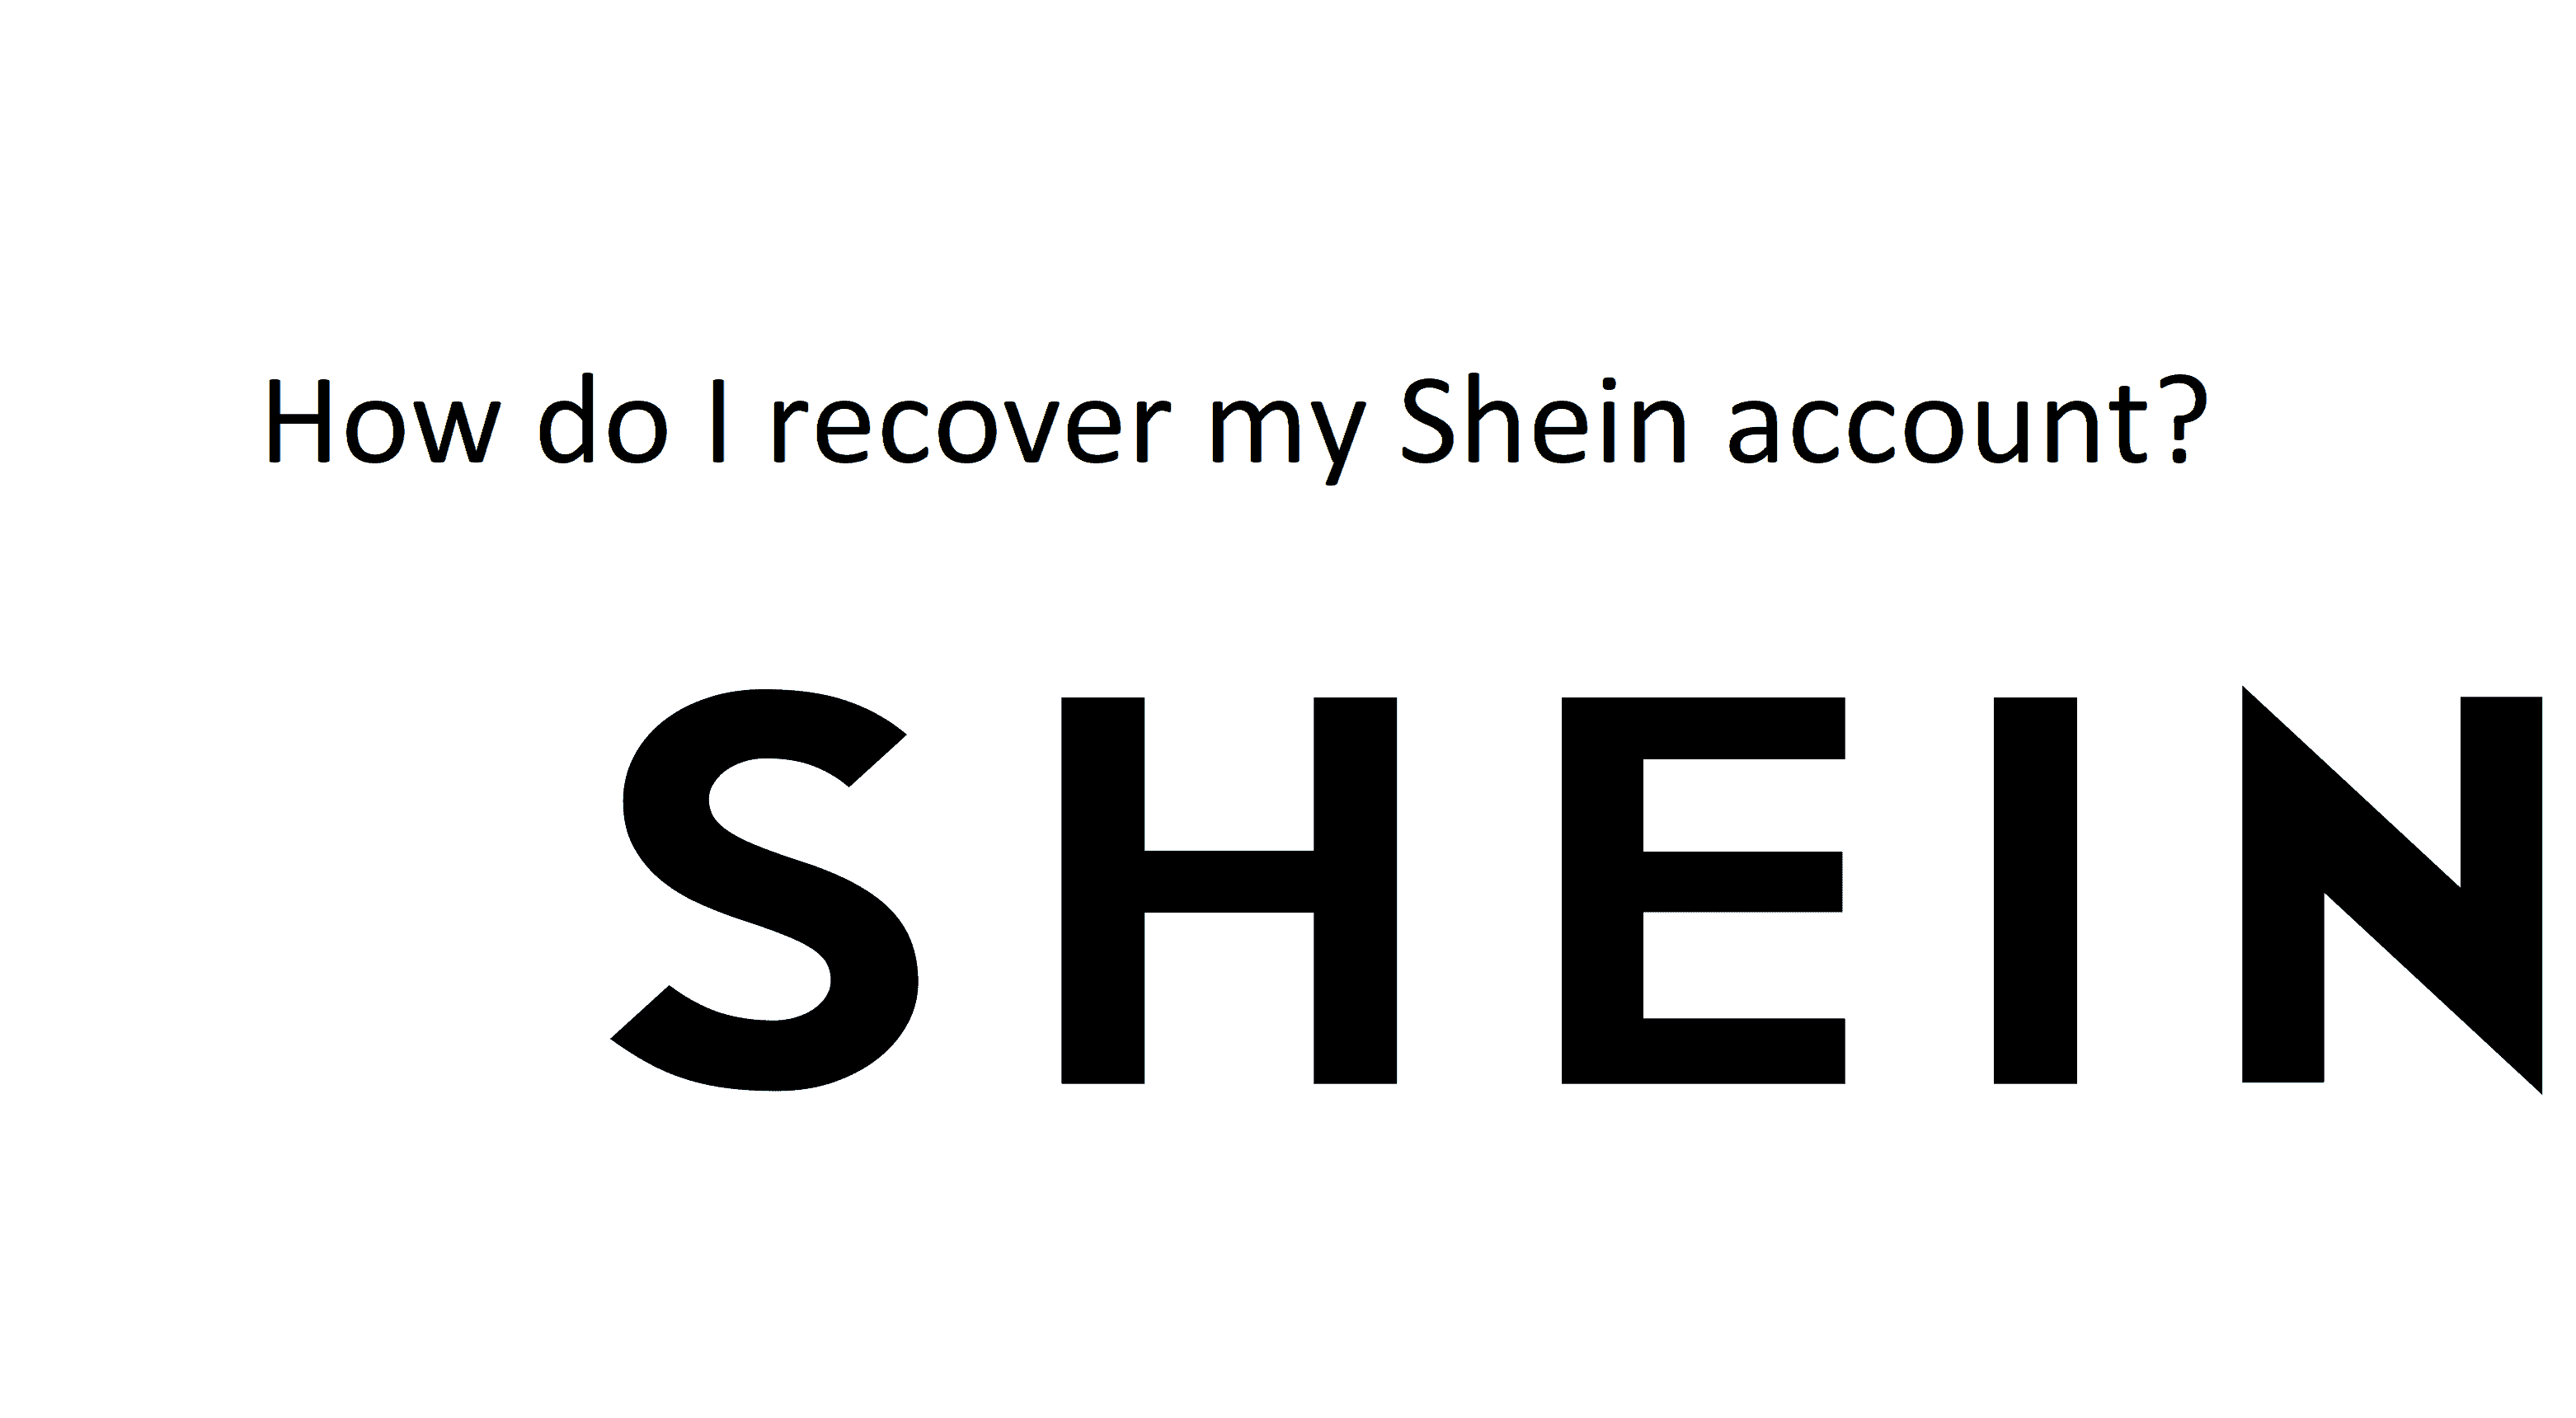 How do I recover my Shein account? - Deleting Solutions